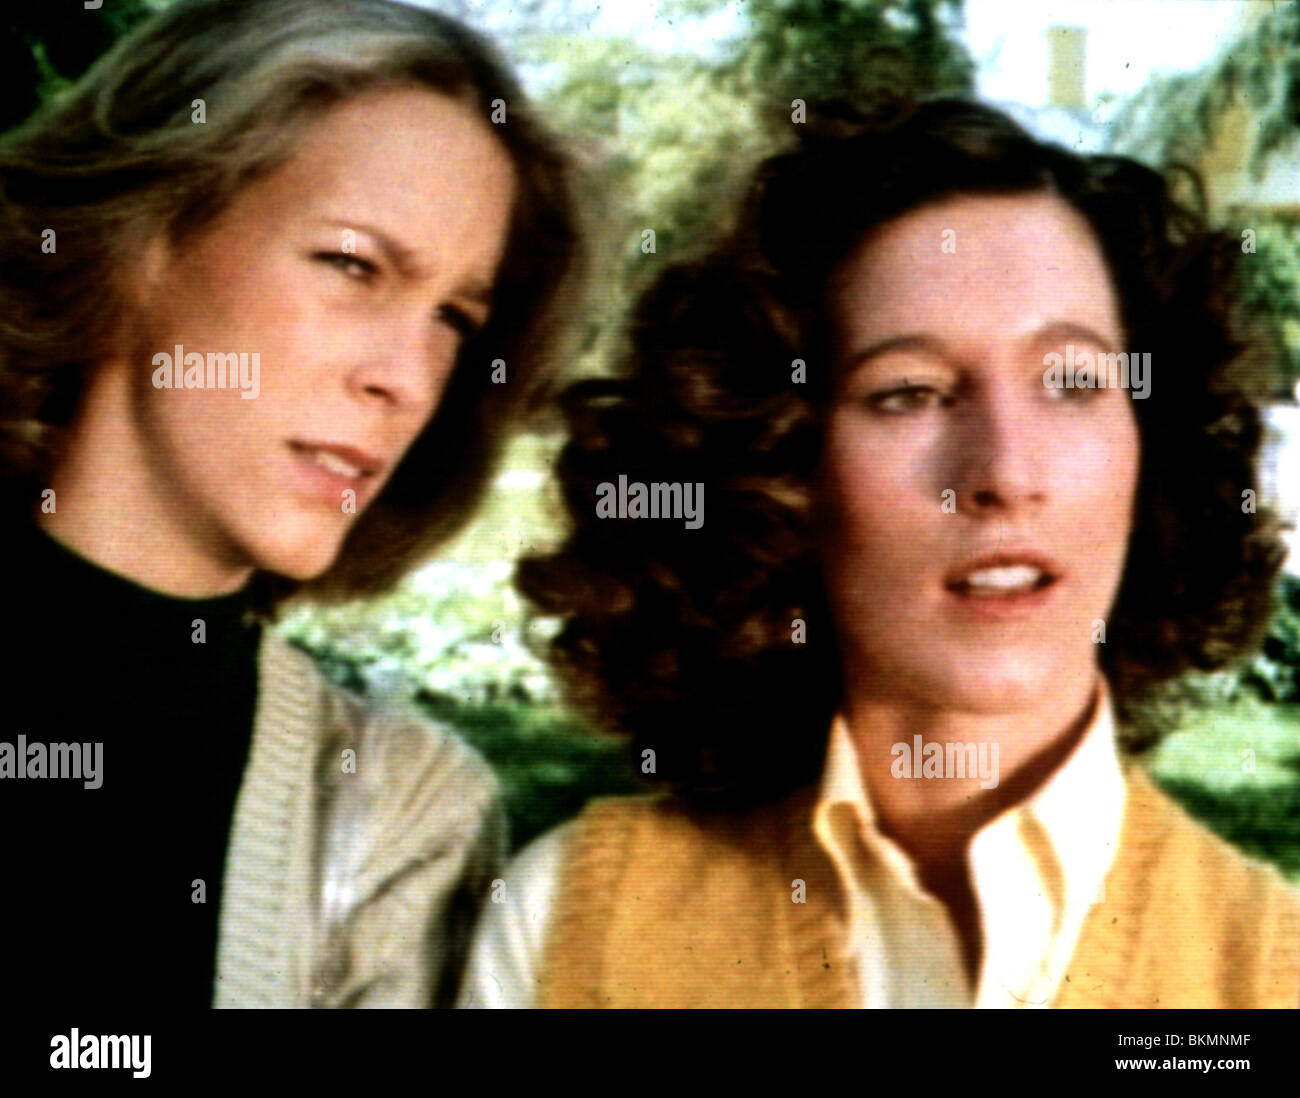 HALLOWEEN (1978) JAMIE LEE CURTIS, NANCY LOOMIS CREDIT ITC - EDITORIAL USE ONLY HLW 019 L Stock Photo